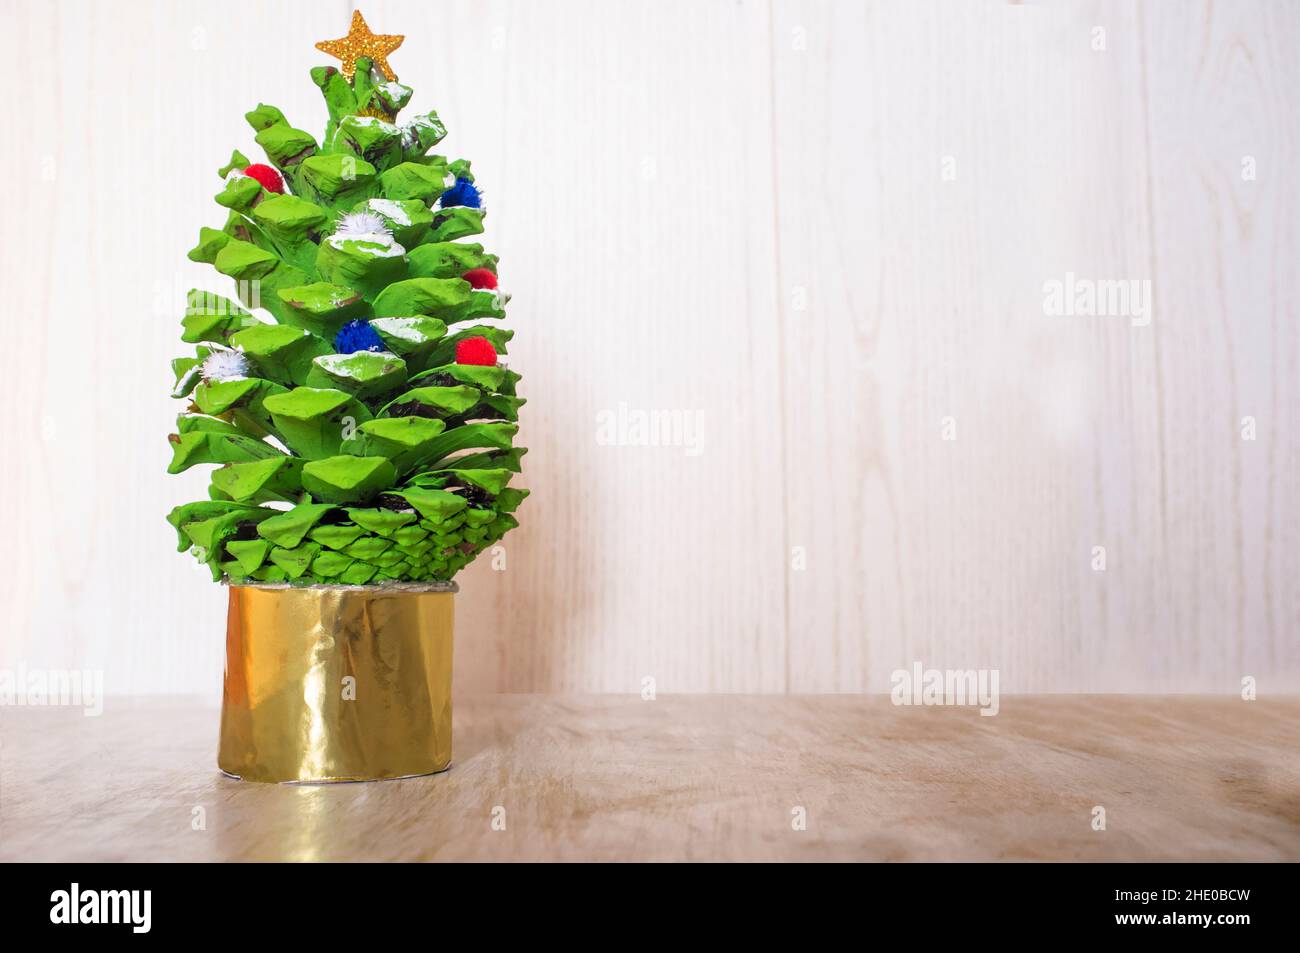 Christmas tree made with painted pine cone. Christmas crafts made with nature parts Stock Photo